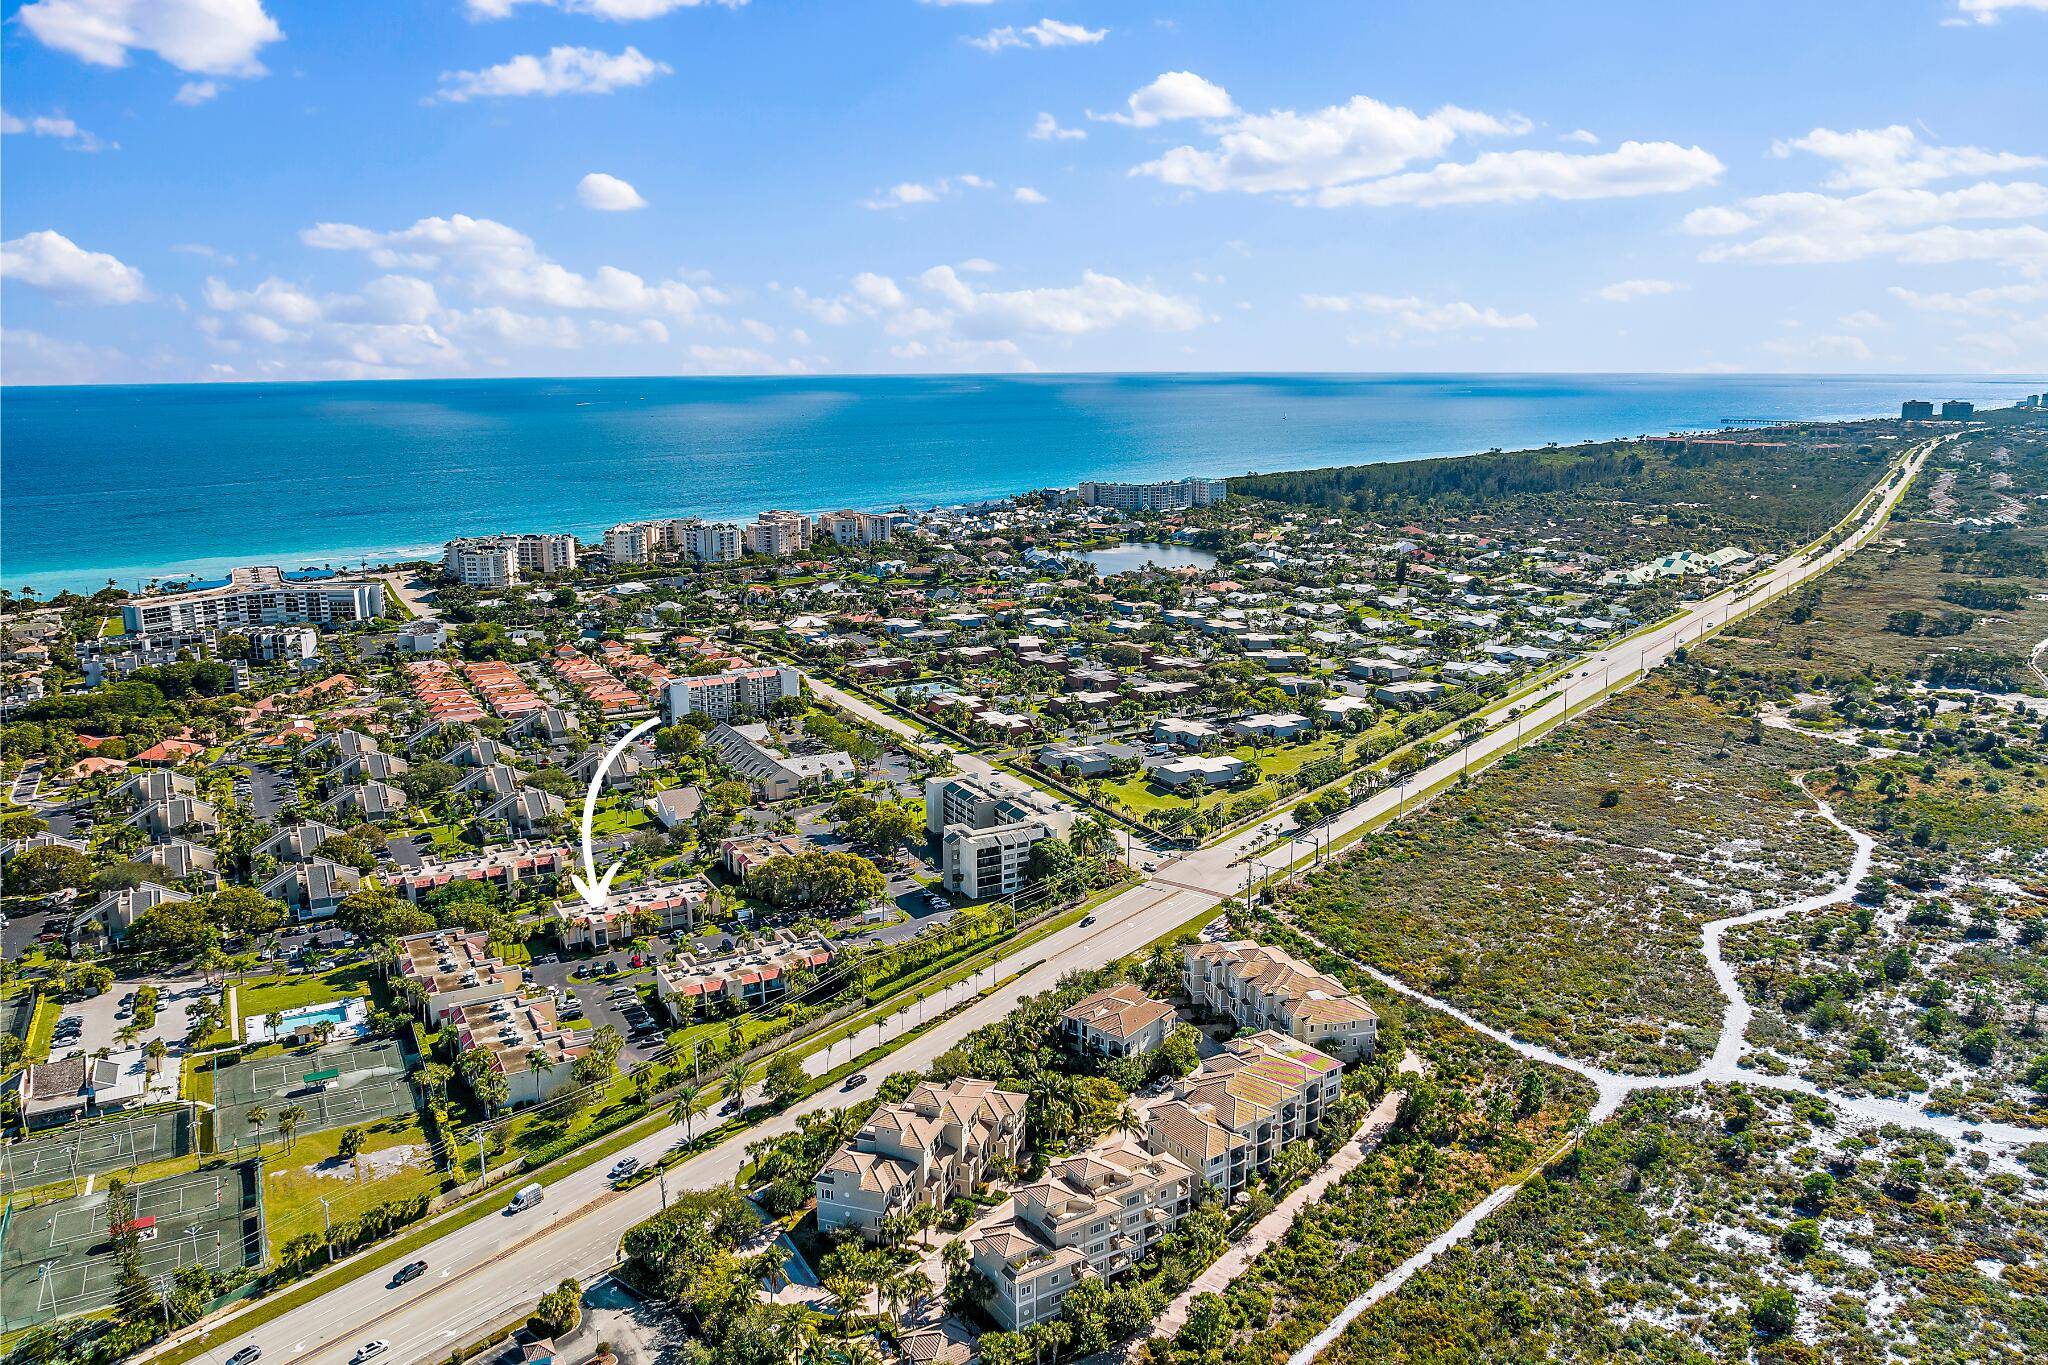 Own a Slice of 33477 Paradise in Jupiter Ocean and Racquet Club.